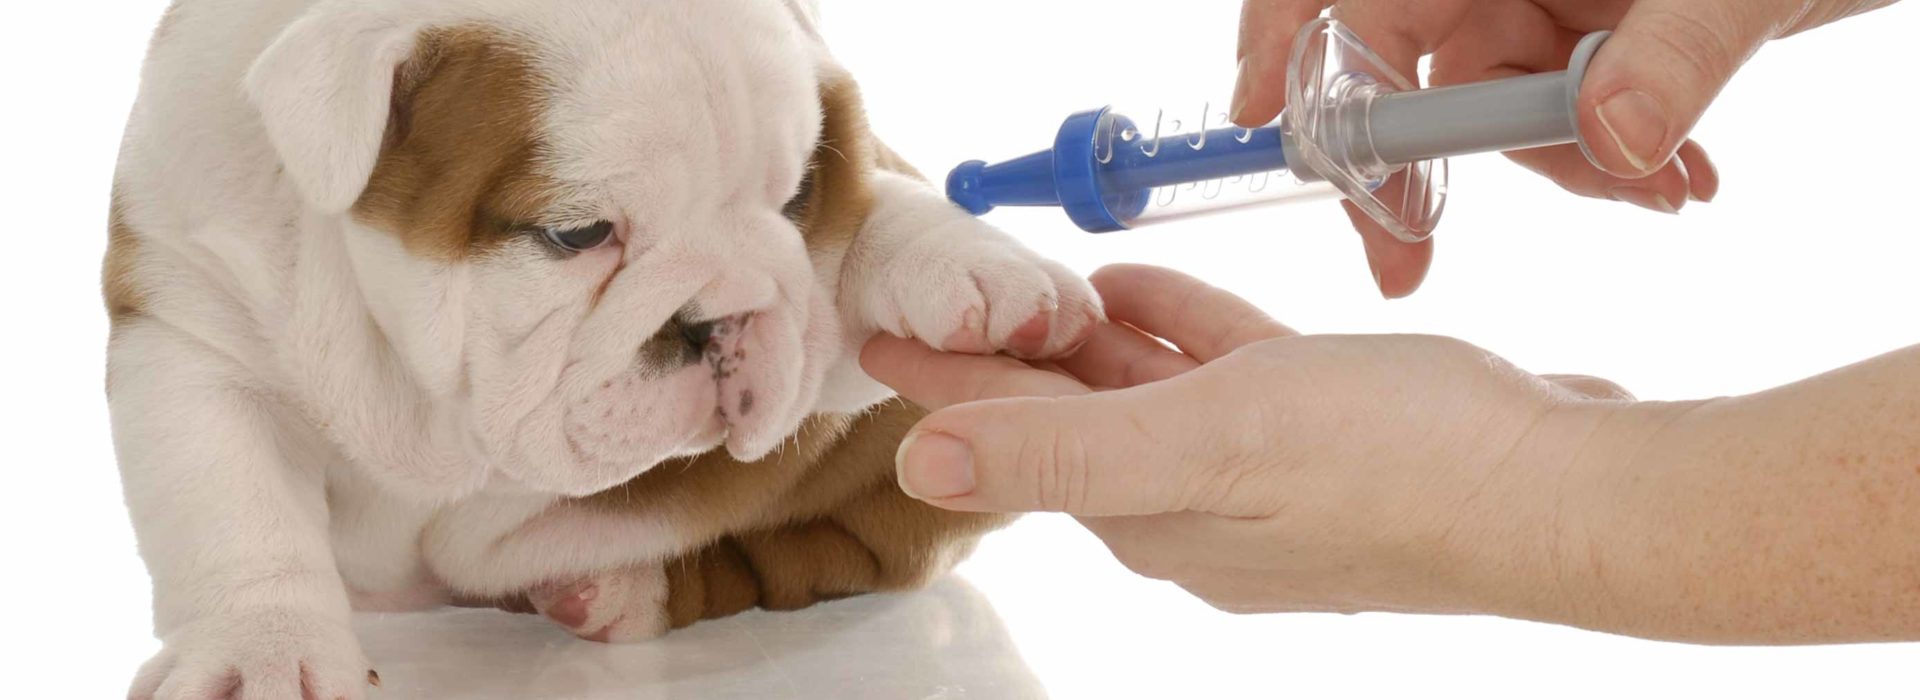 Puppy getting a vaccination